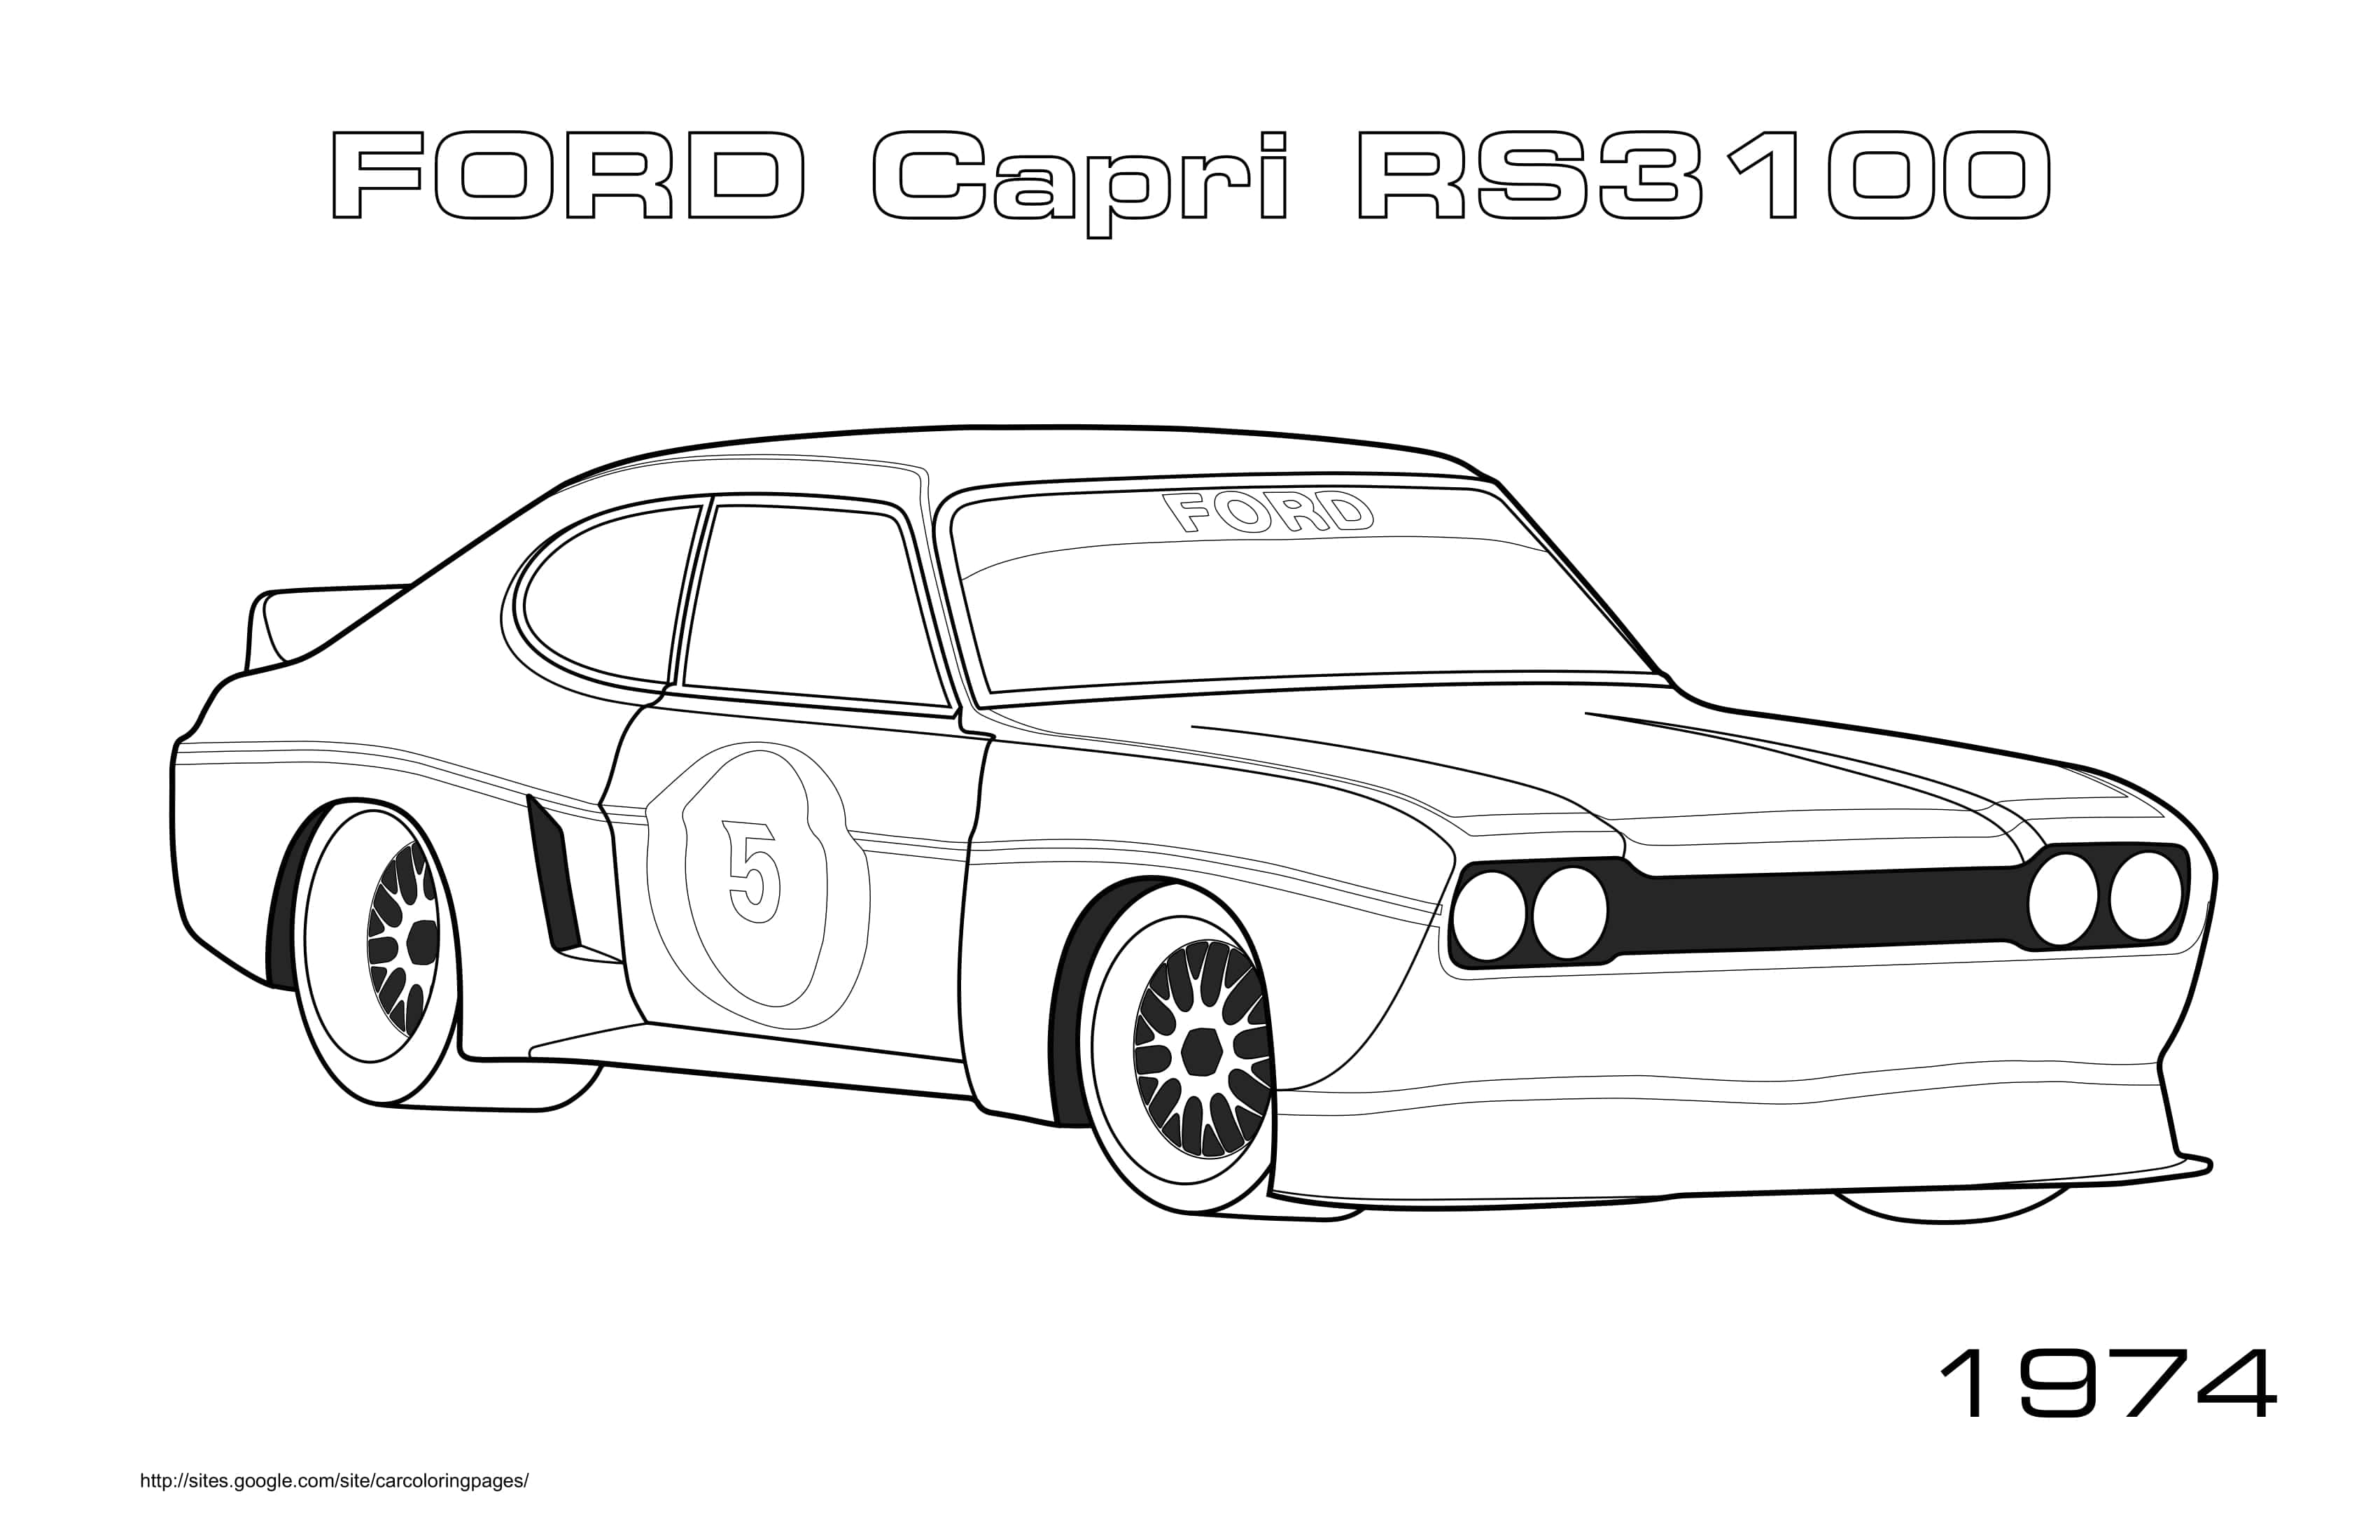 Ford Capri Rs3100 1974 Coloring Page